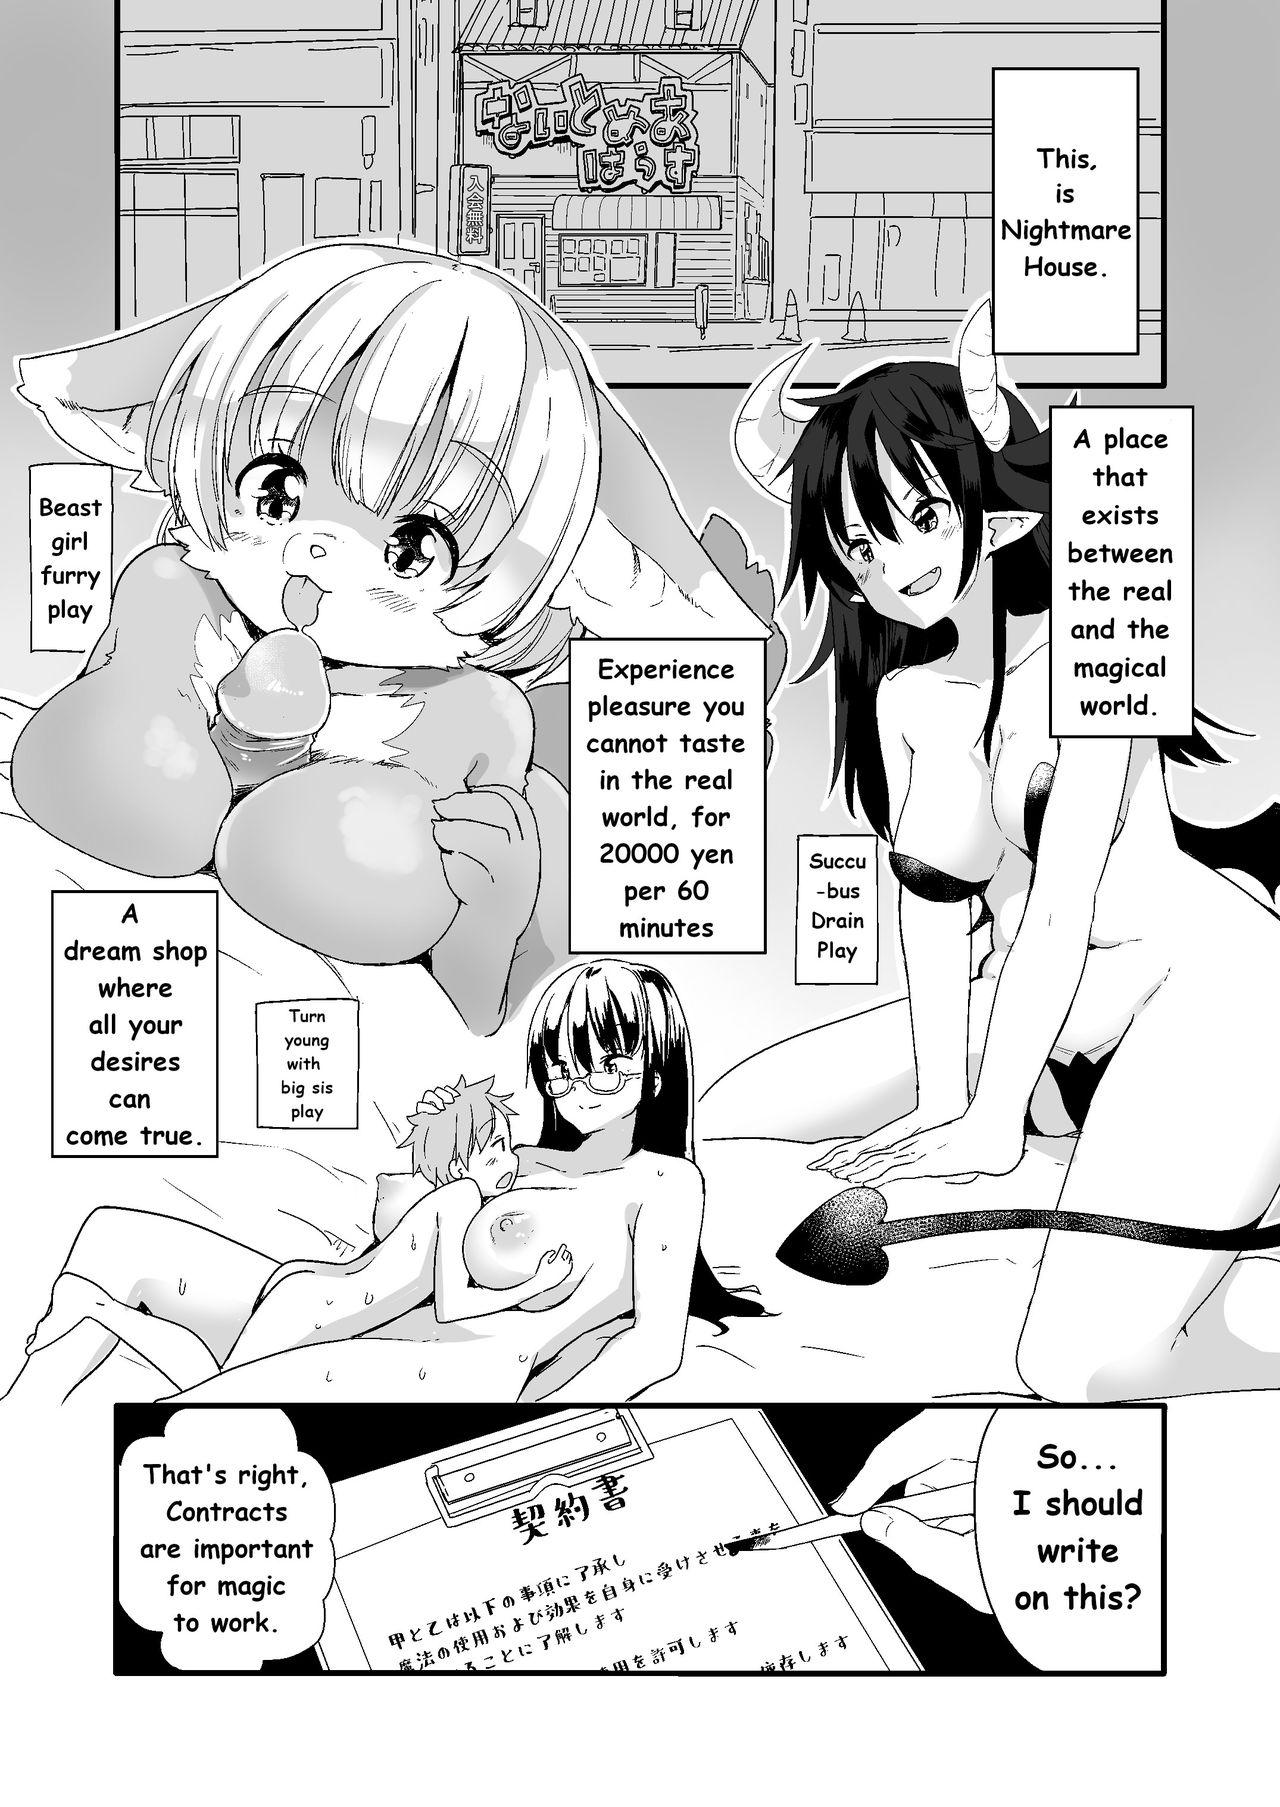 Collar Nightmare House e Youkoso | Welcome to the Nightmare House - Original Big Ass - Page 1